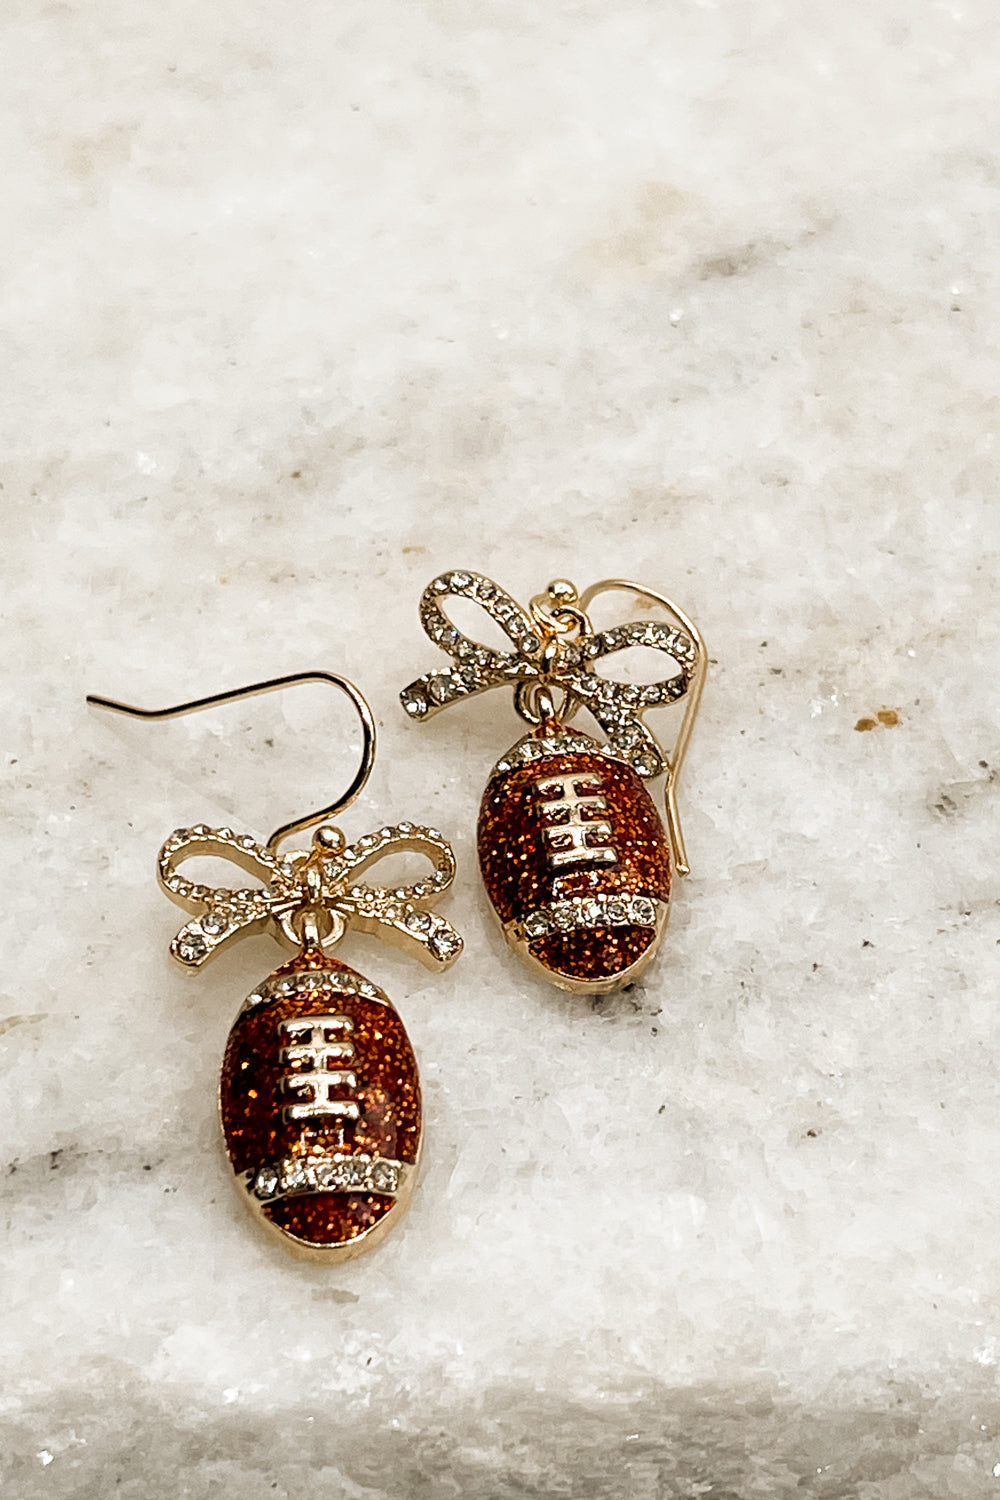 Close up of Callie Brown Rhinestone Football Earrings that are dangle earrings with rhinestone bows and footballs.